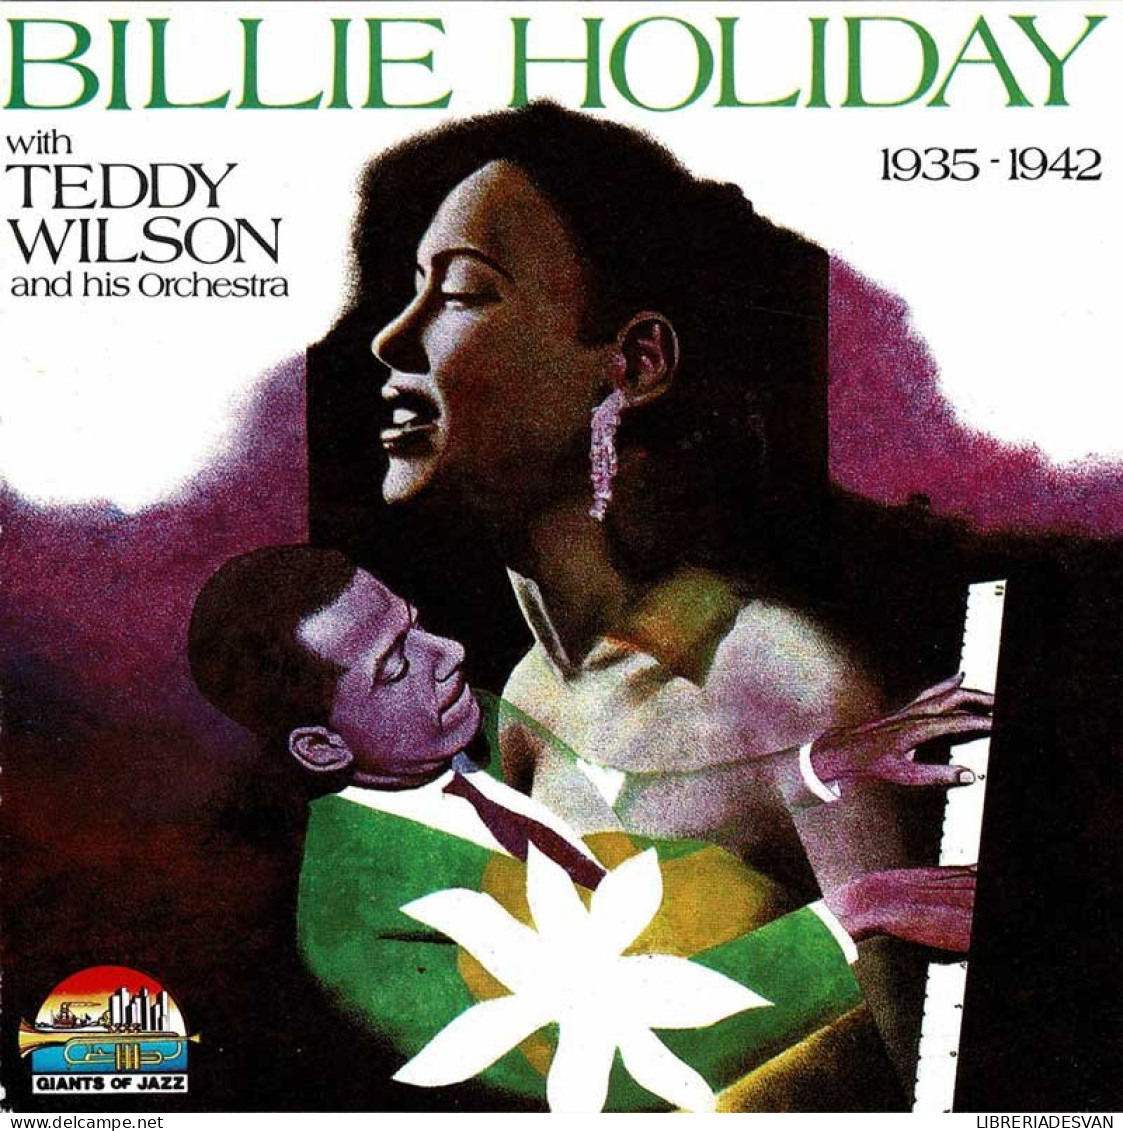 Billie Holiday With Teddy Wilson And His Orchestra - 1935 - 1942. CD - Jazz